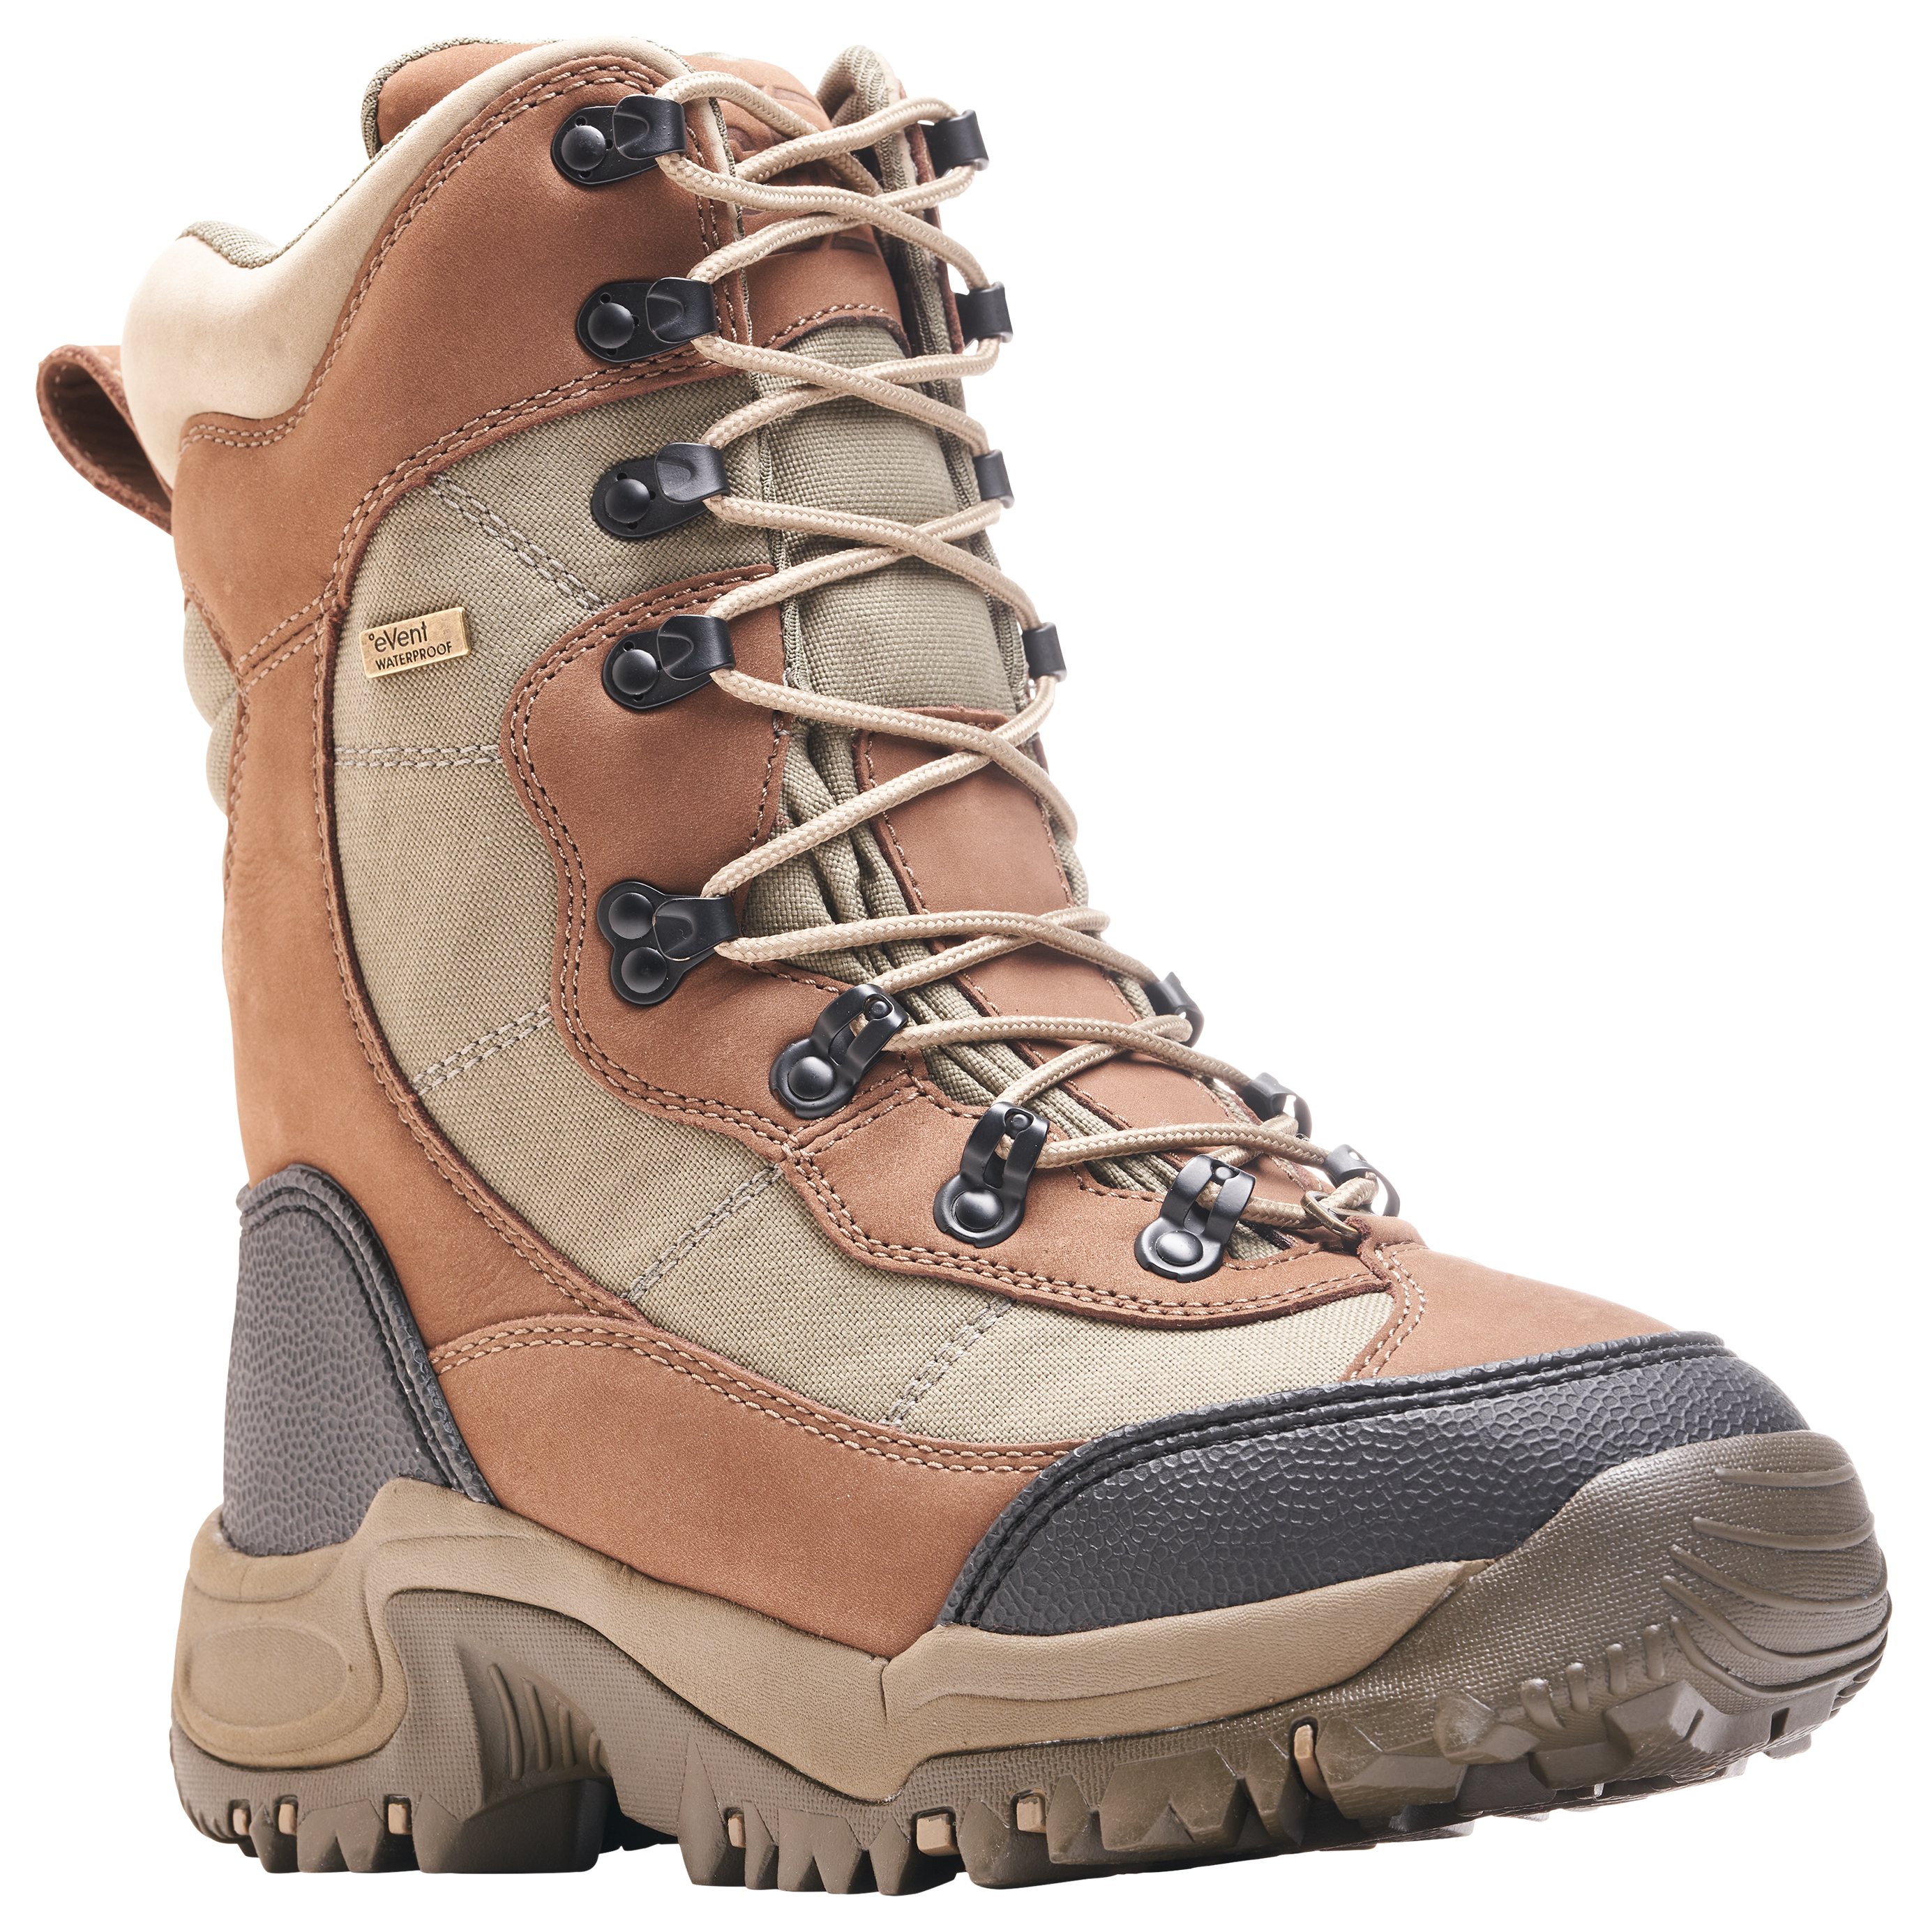 SHE Outdoor Inferno II Insulated Waterproof Hunting Boots for Ladies - Brown - 10M